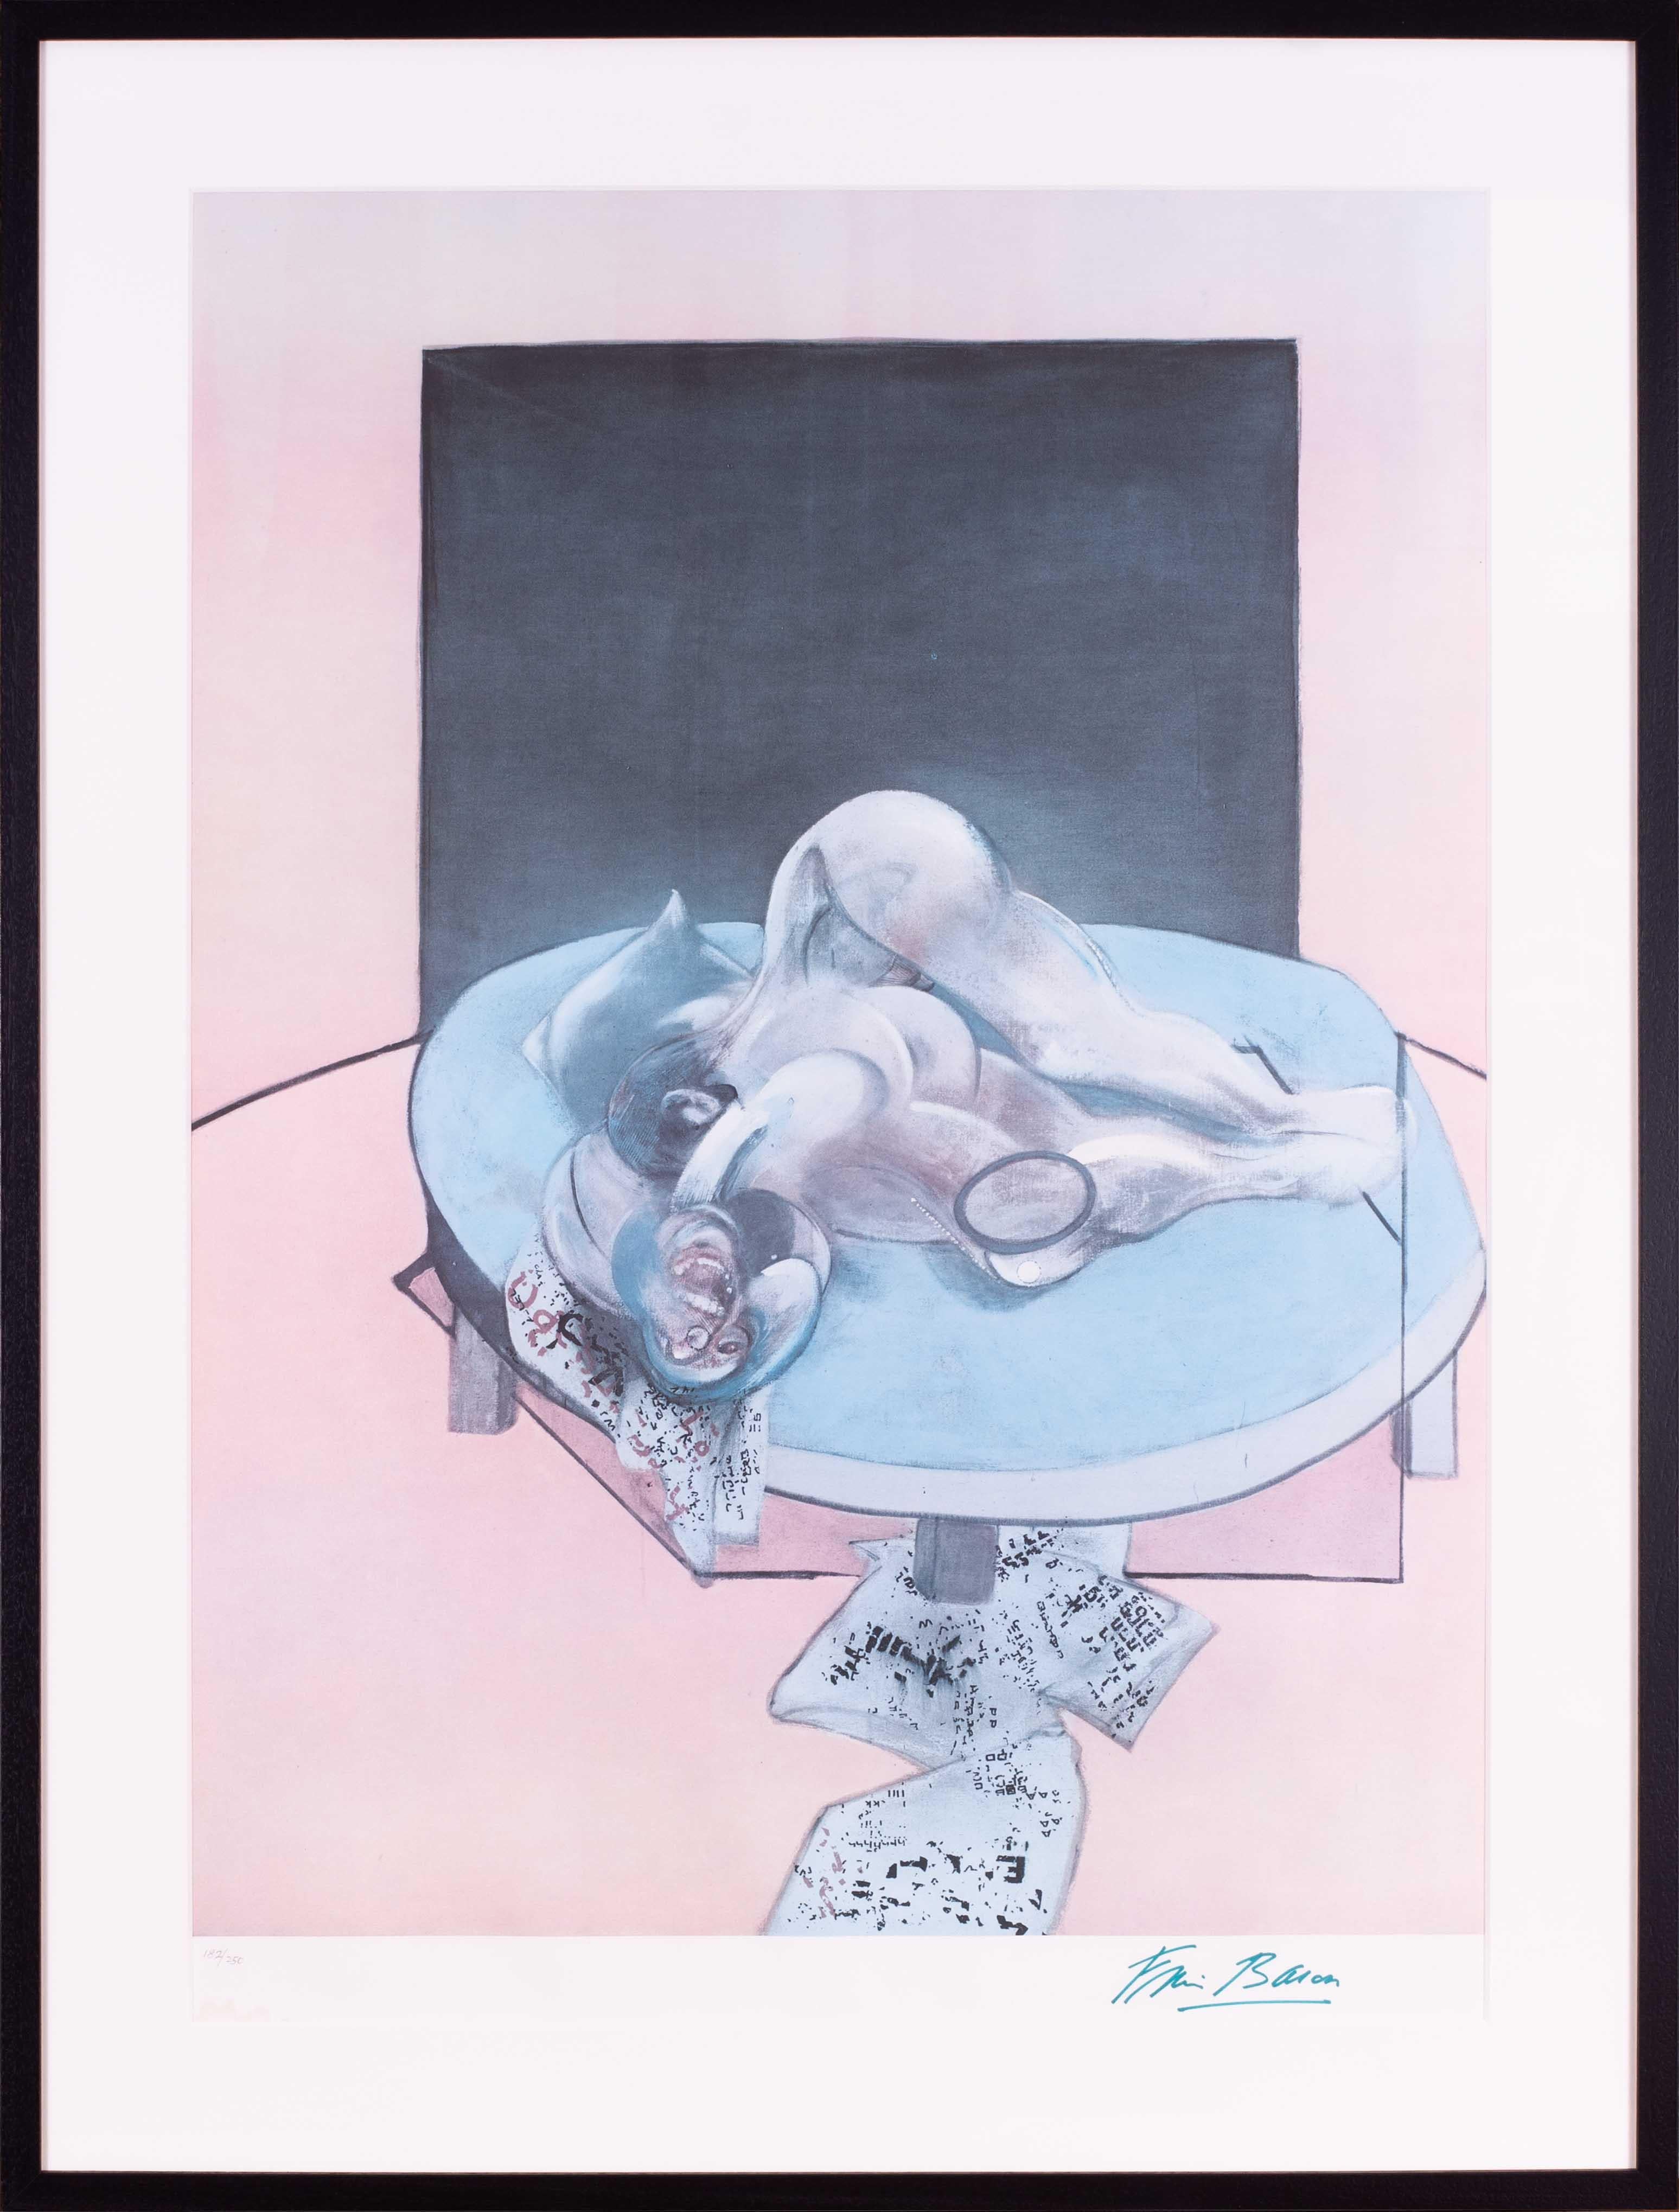 Francis Bacon, signed 182/250 offset lithograph, study of the human body, 1980